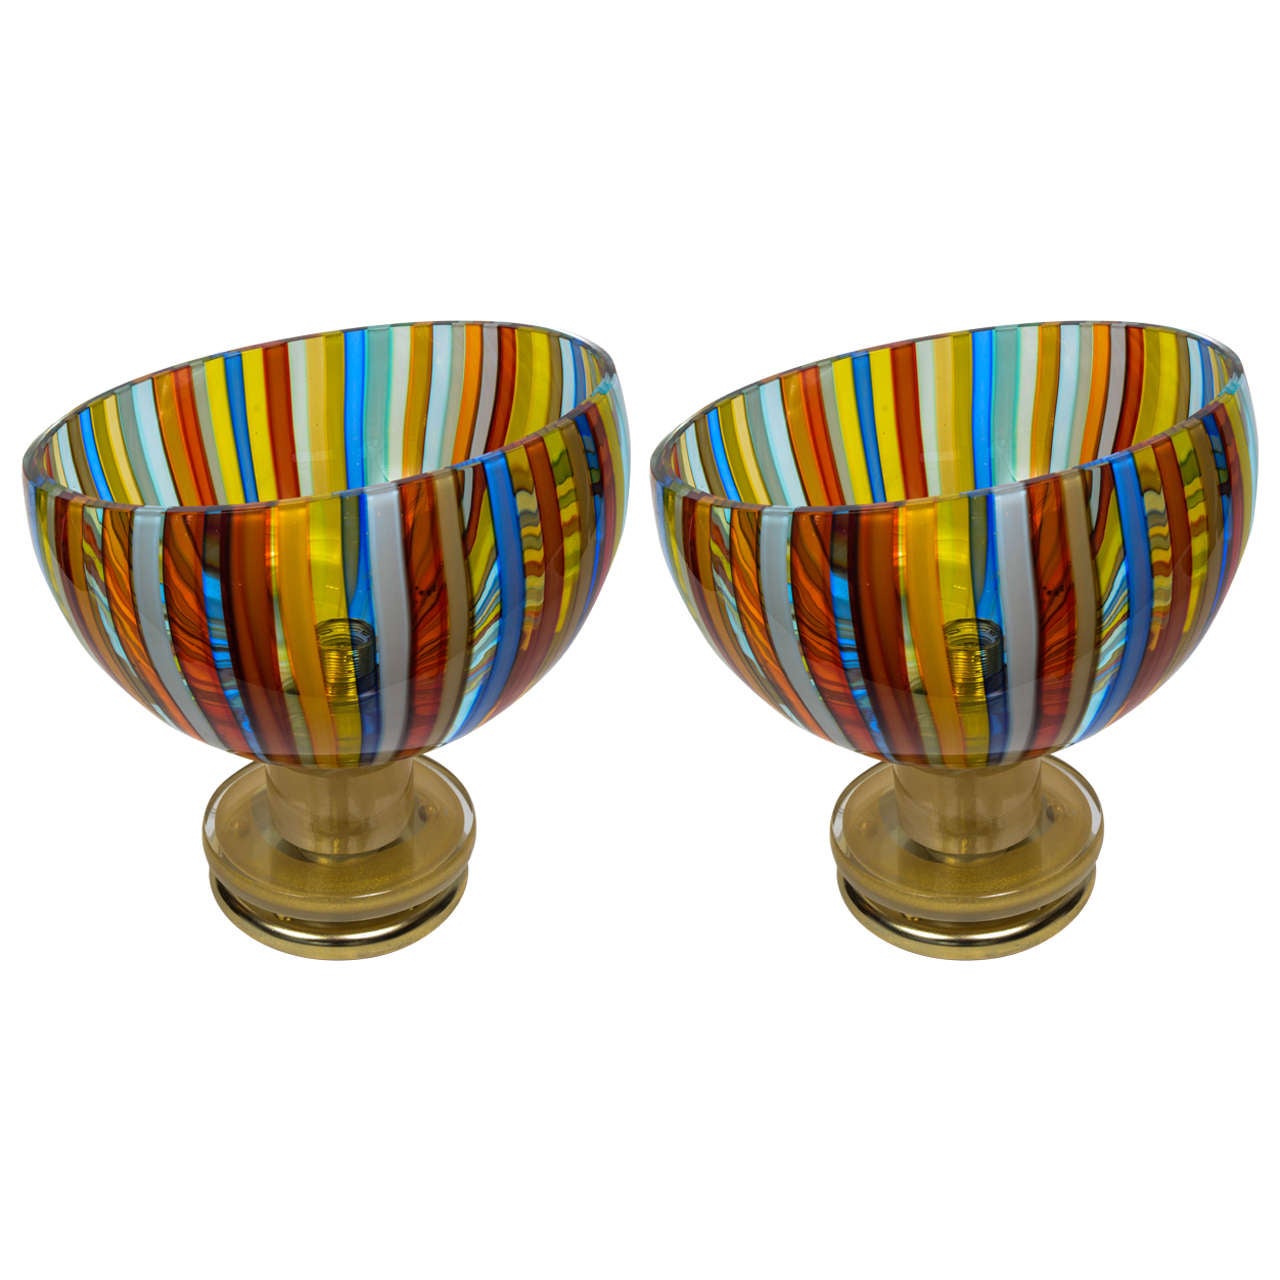 Colorful Pair of Murano Glass Lamps